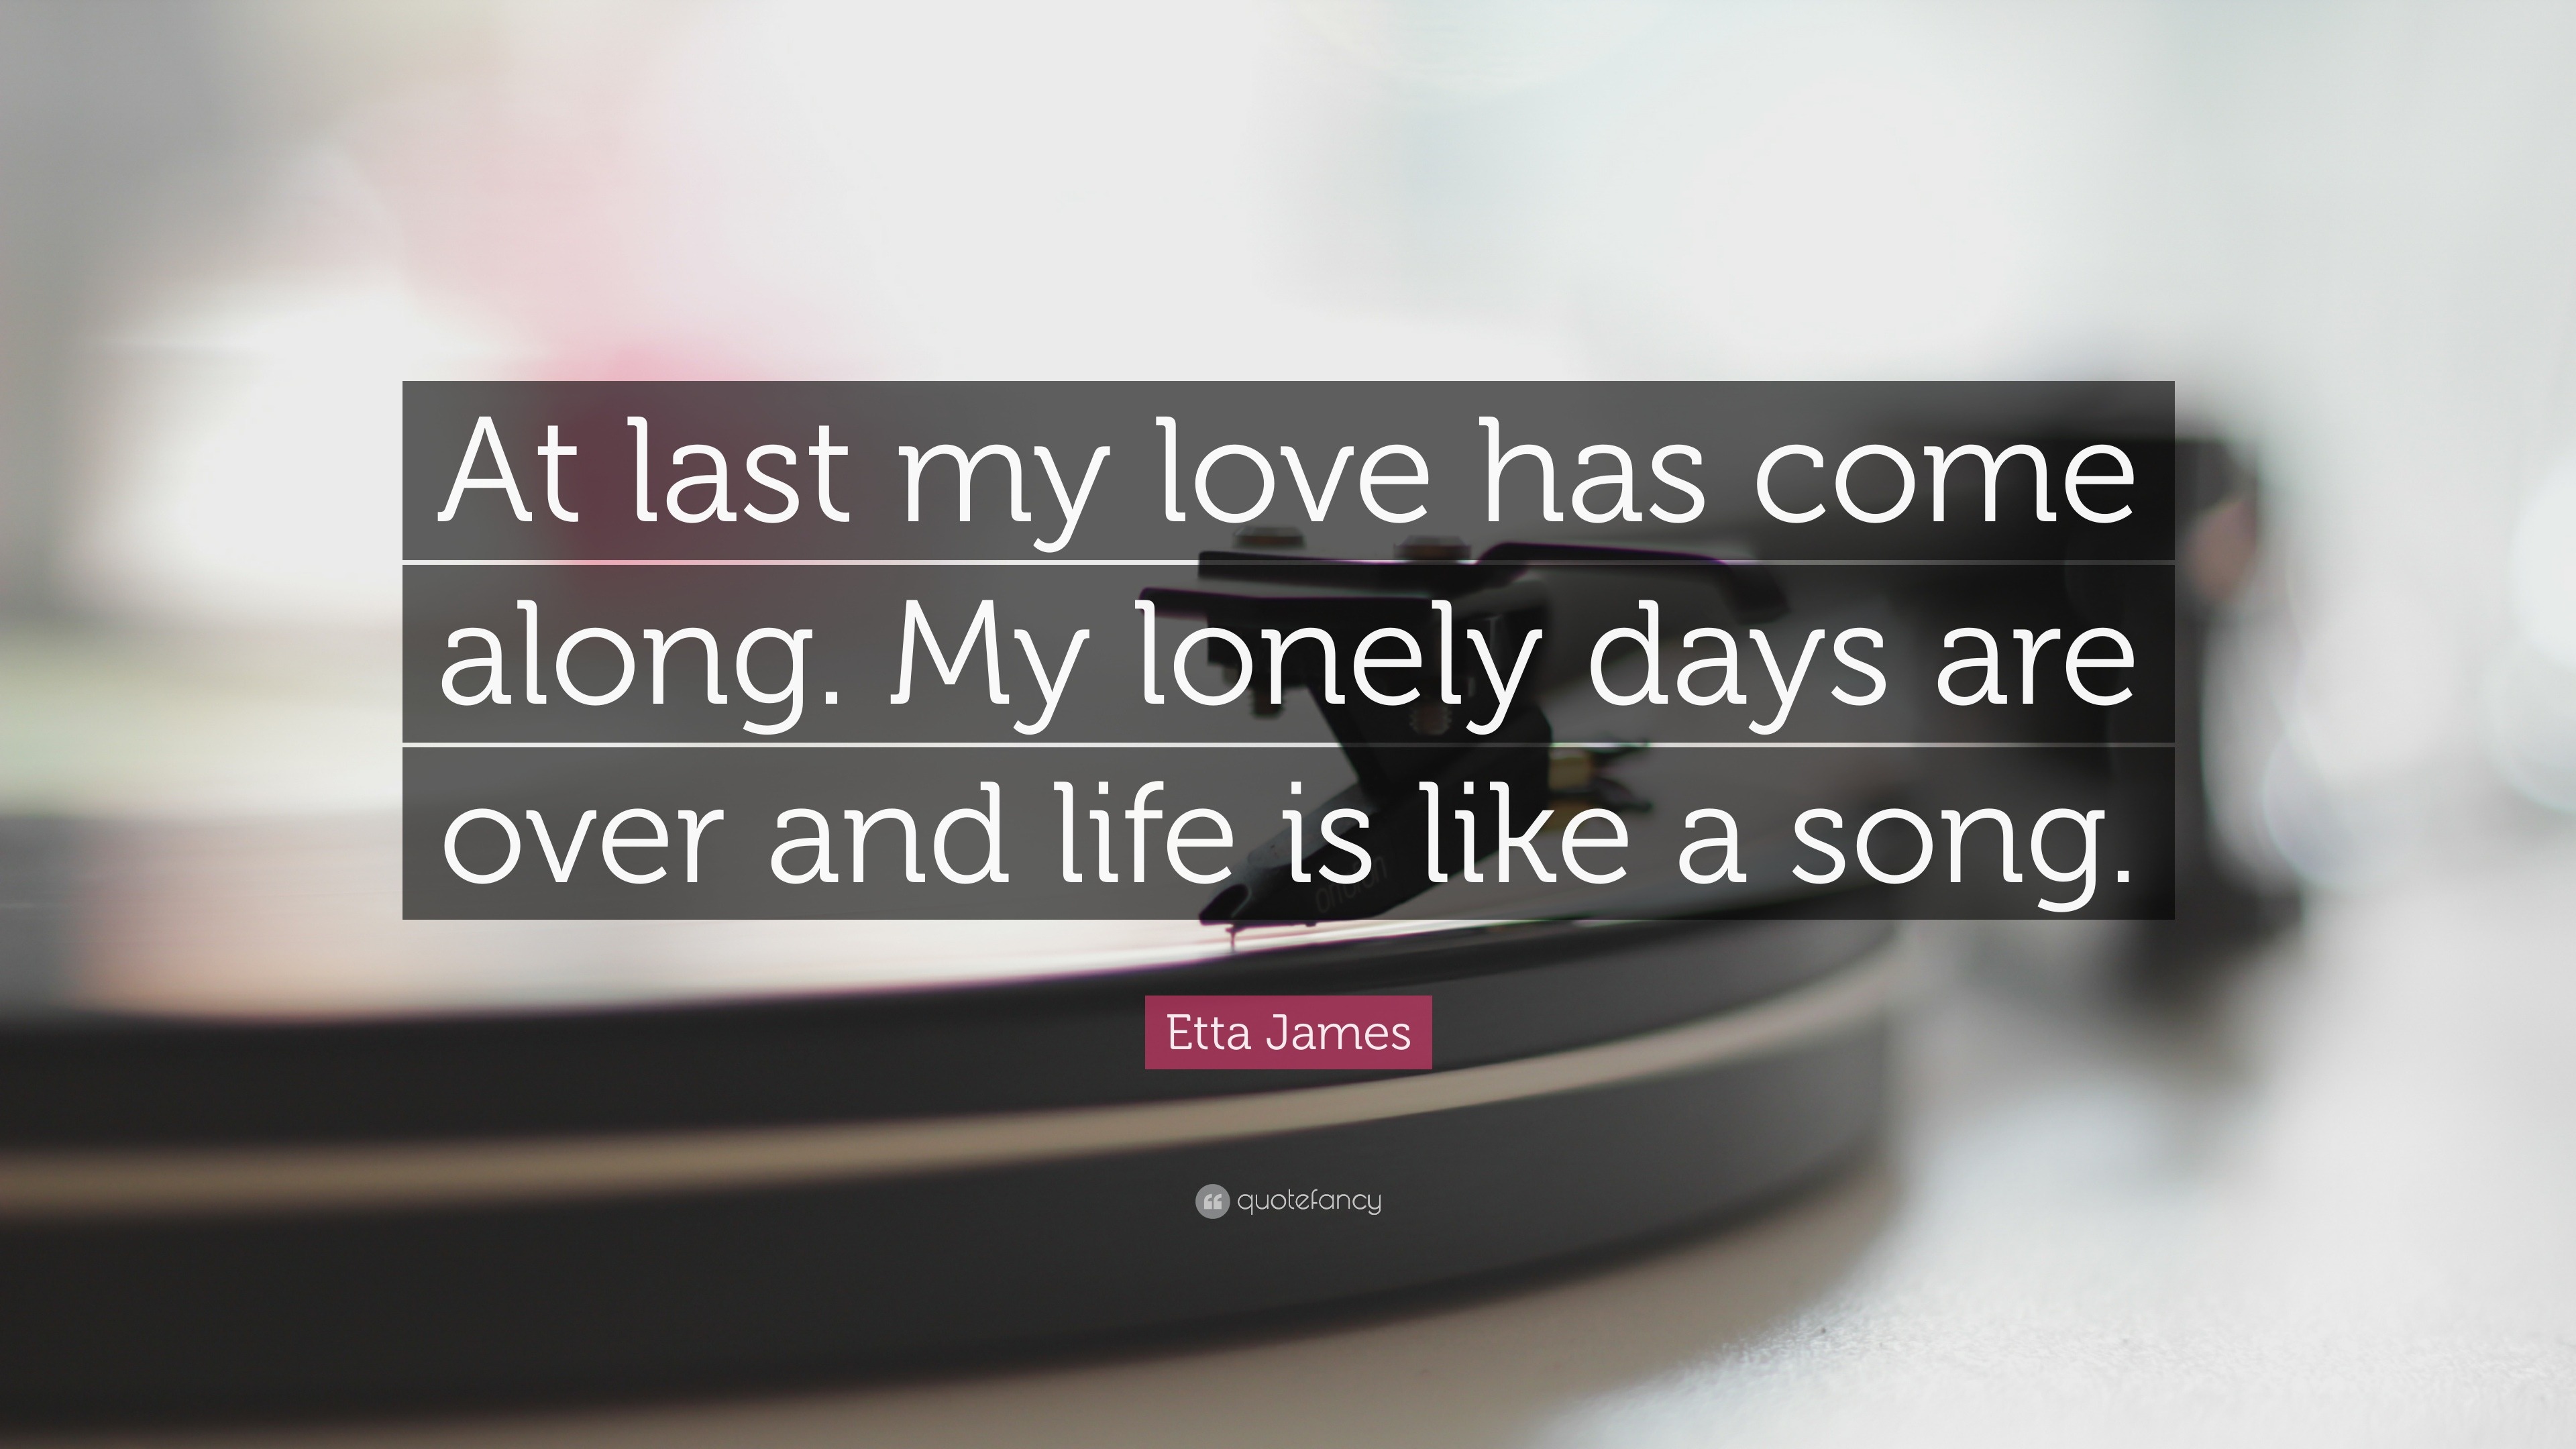 My lonely days are over and life is like a song. 